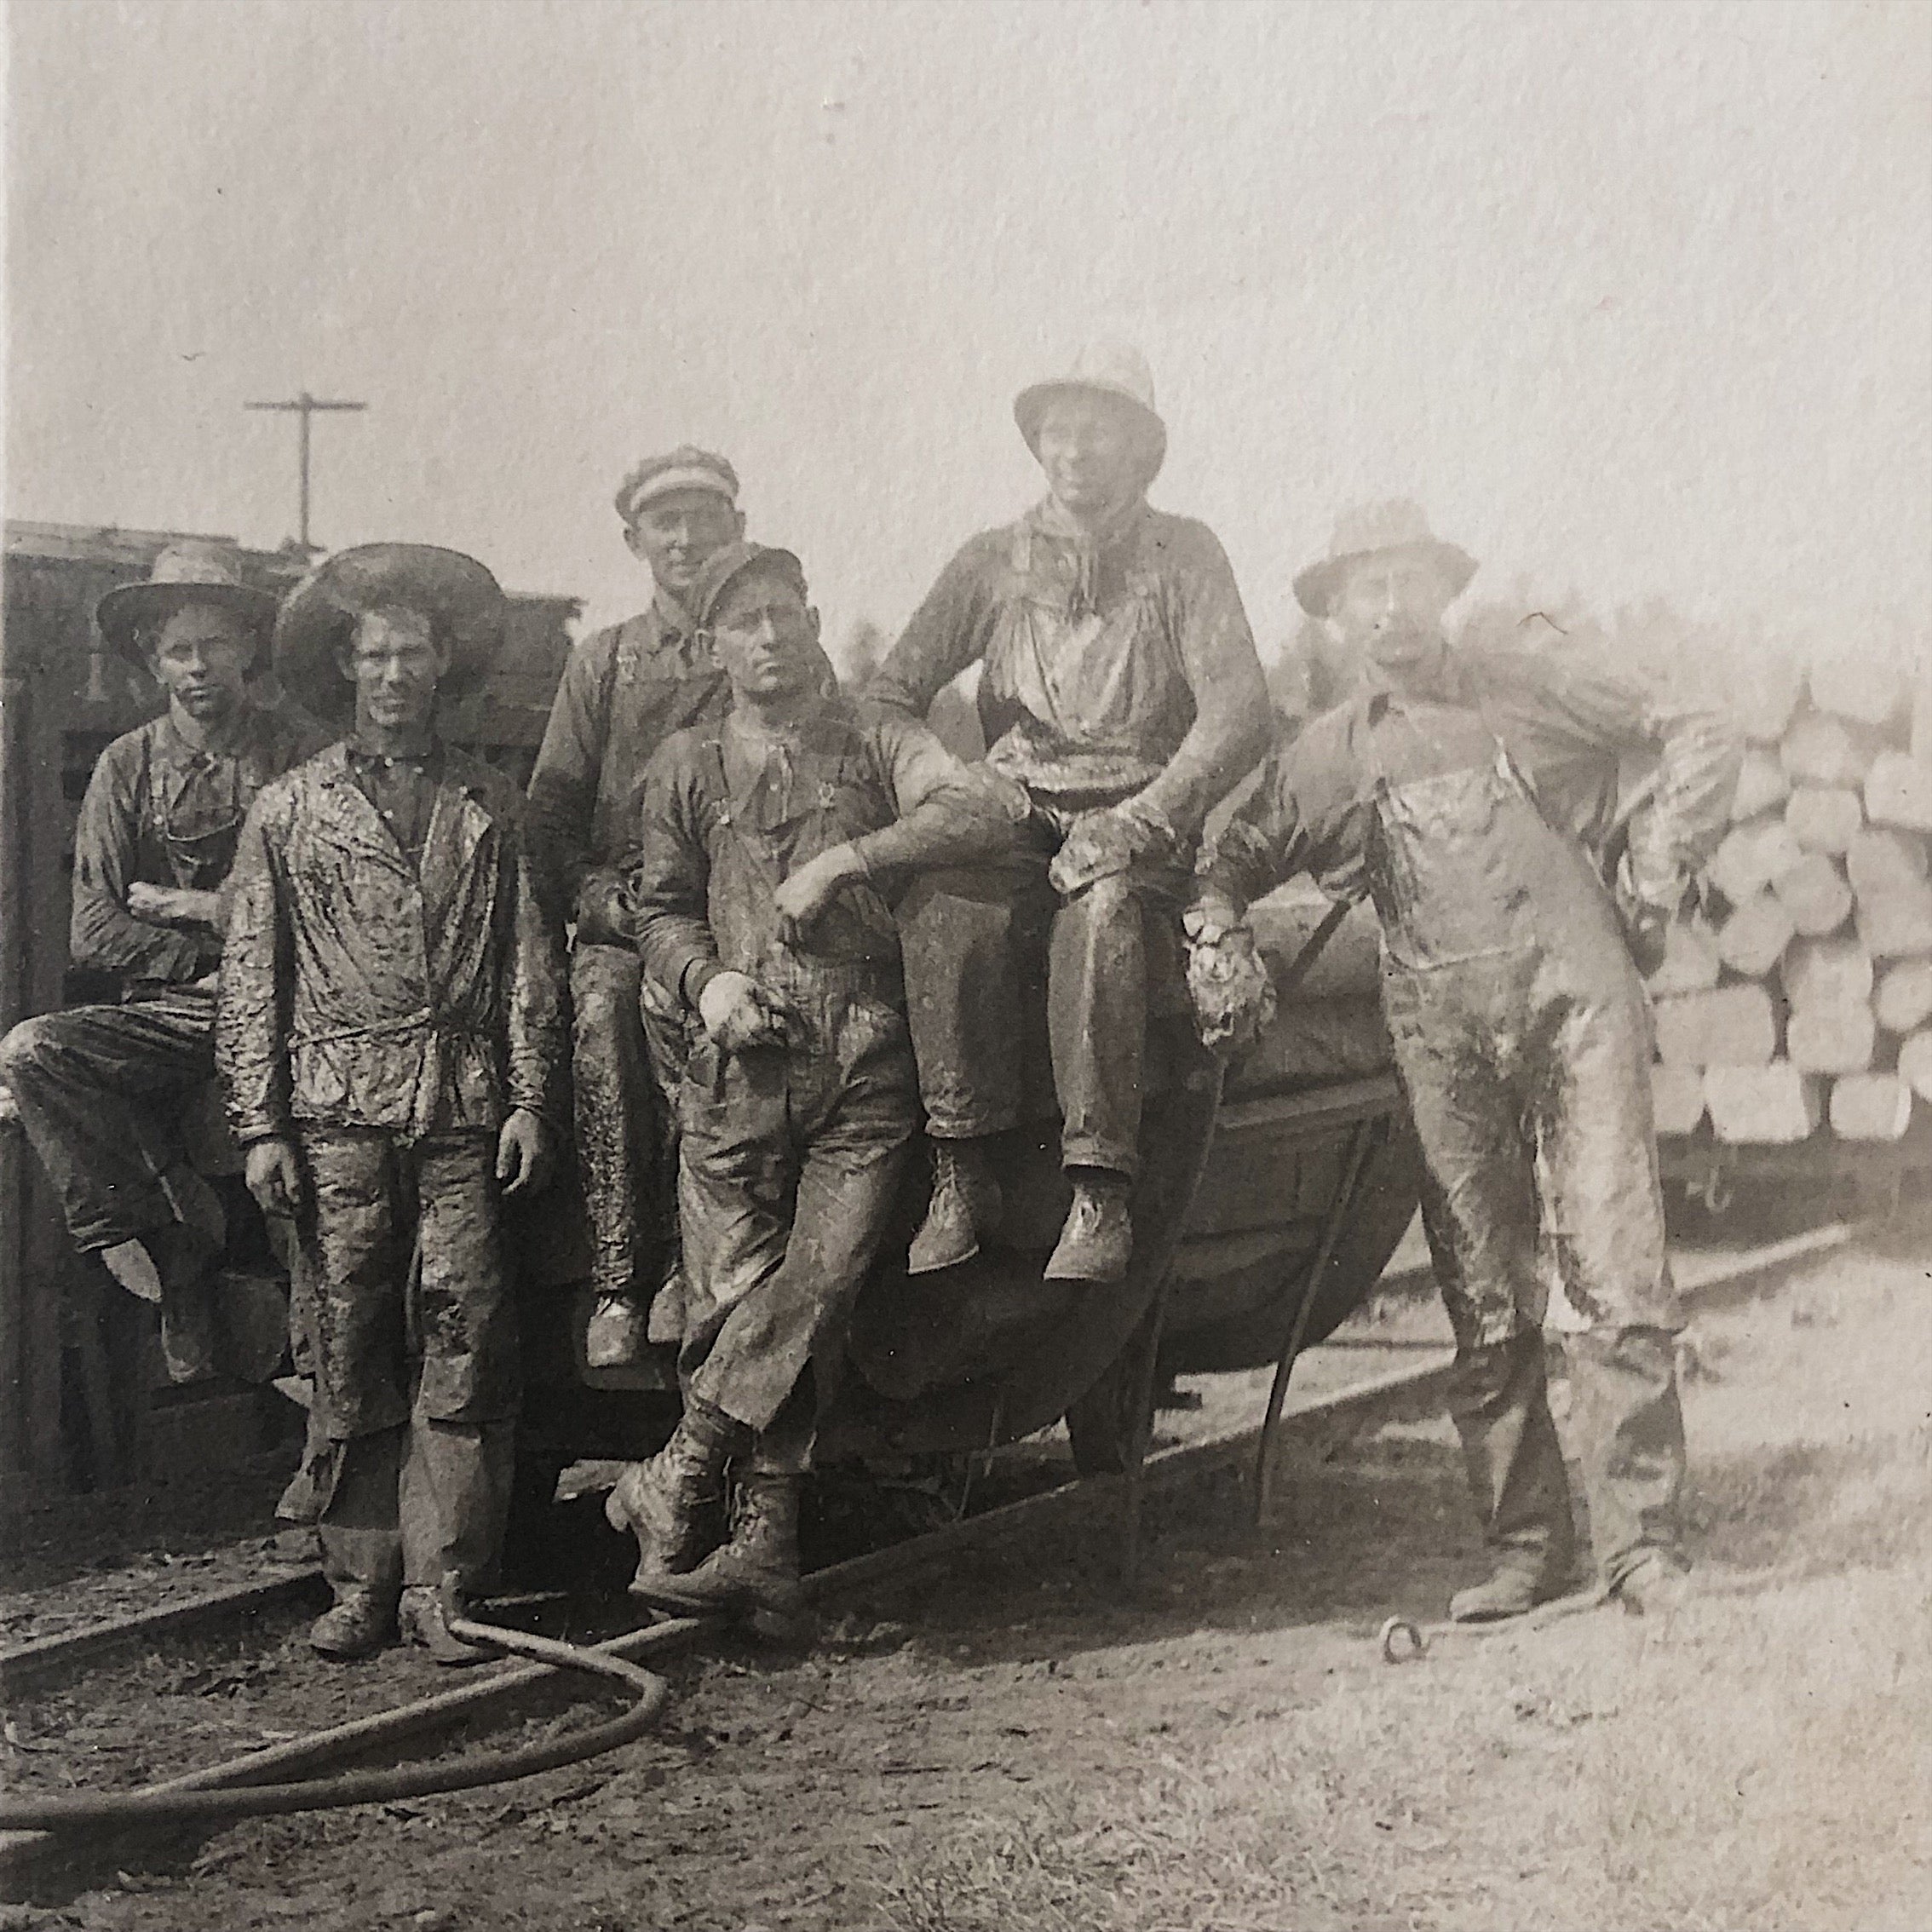 Antique Postcard of Railroad Lumber Workers - Rare RPPC - Early 1900s - Vintage Denim Workwear - Unused - Work Boots - Jackets